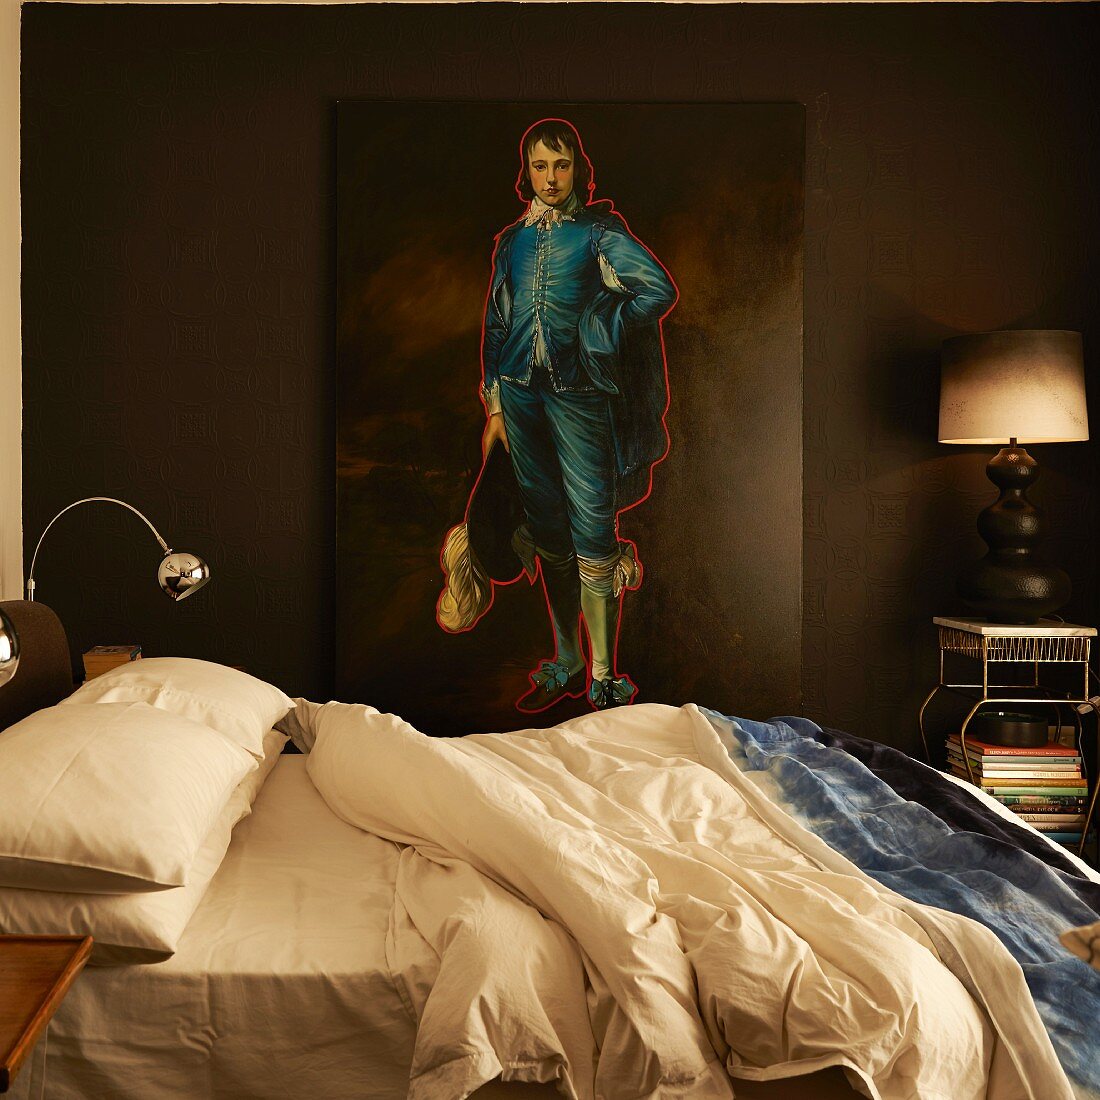 Double bed in front of portrait of man in Baroque clothing outlined in red leaning against wall painted dark brown